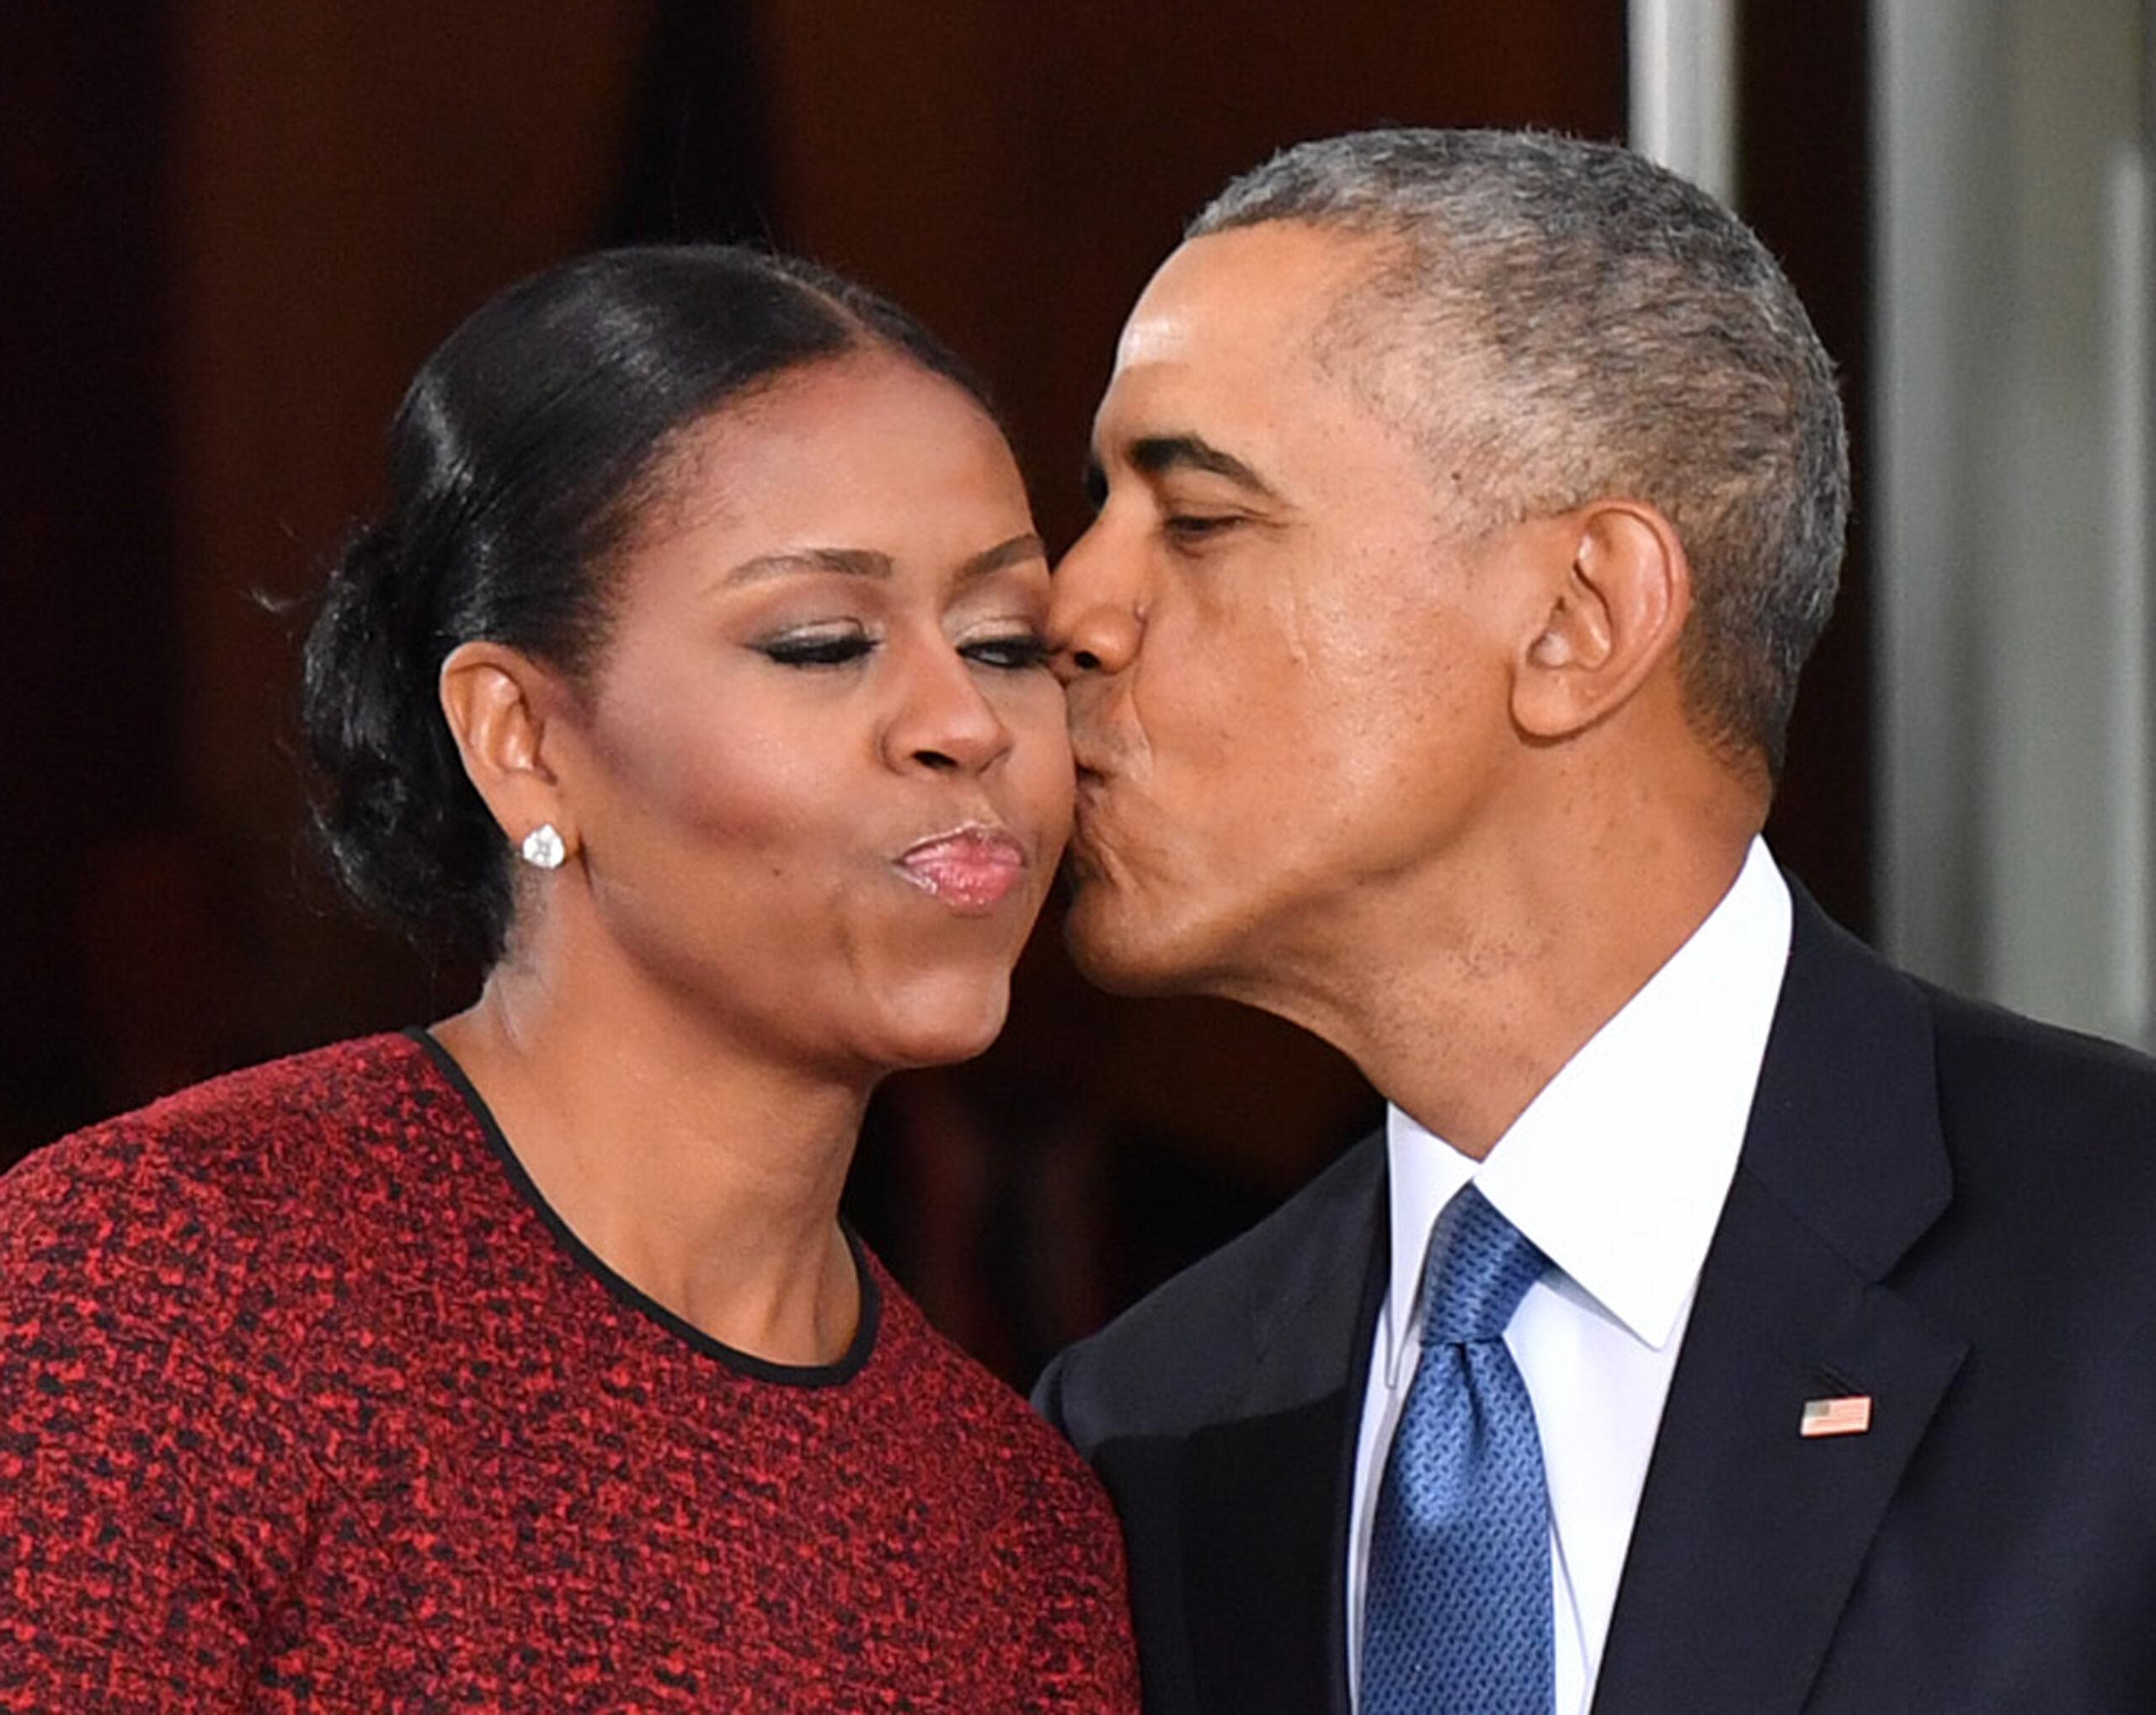 President Barack Obama kisses his wife Michelle on the cheek